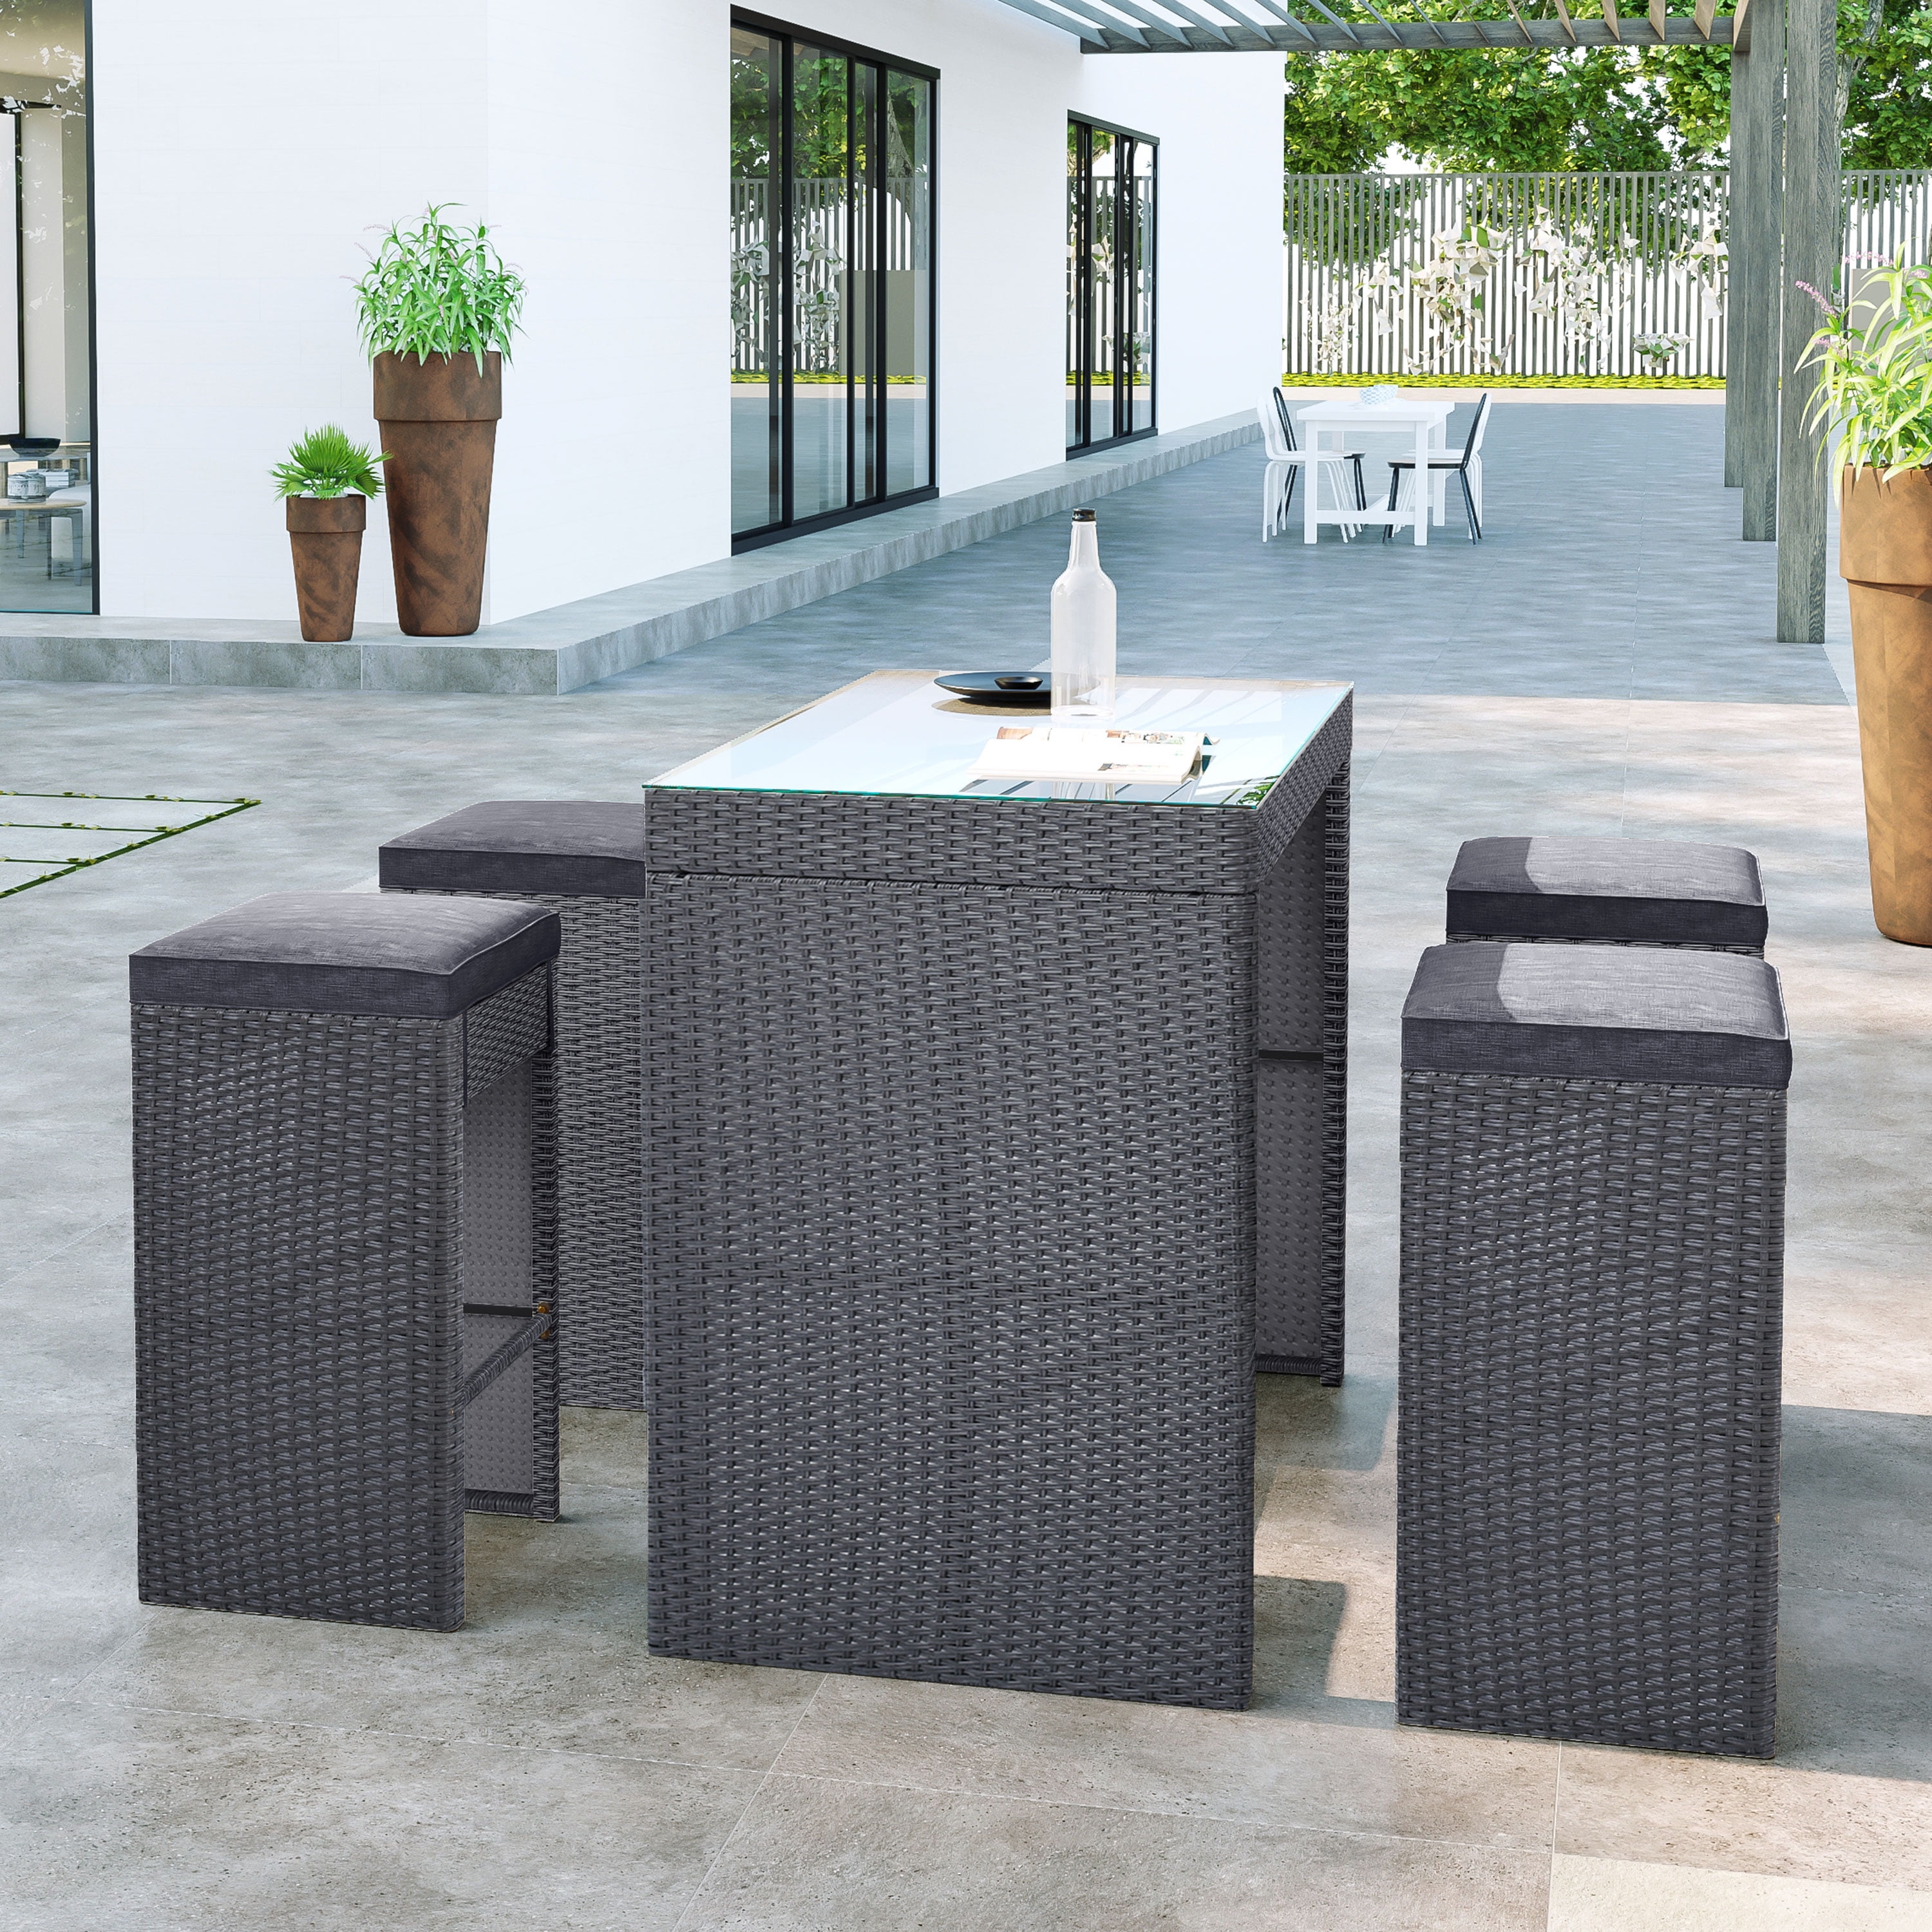 SYNGAR 5 Piece Outdoor Wicker Bar Table Set, Patio All Weather PE